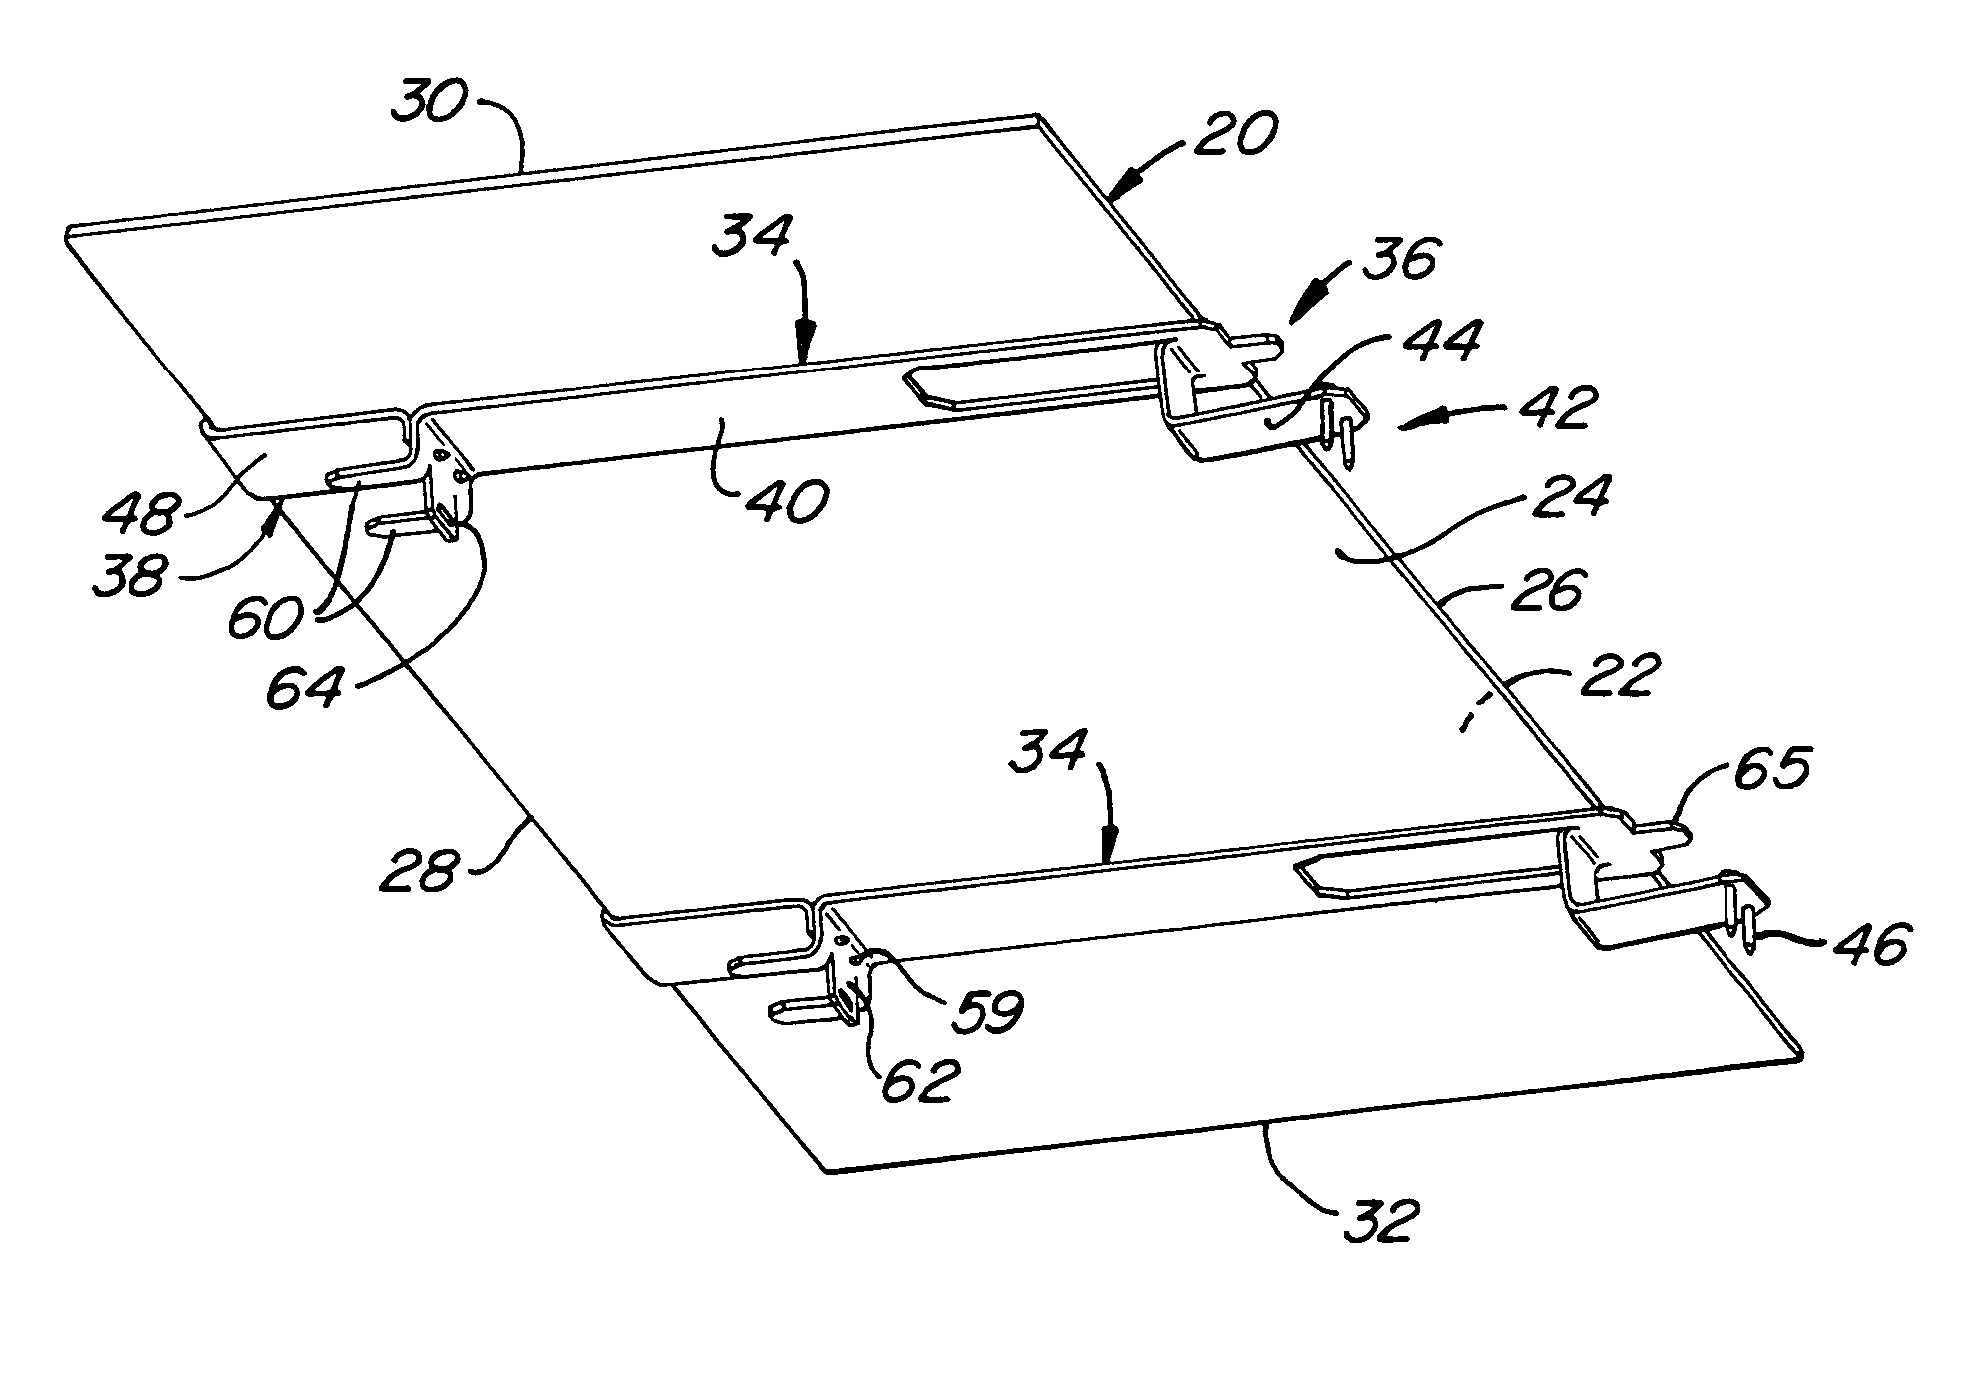 Shingle assembly with support bracket